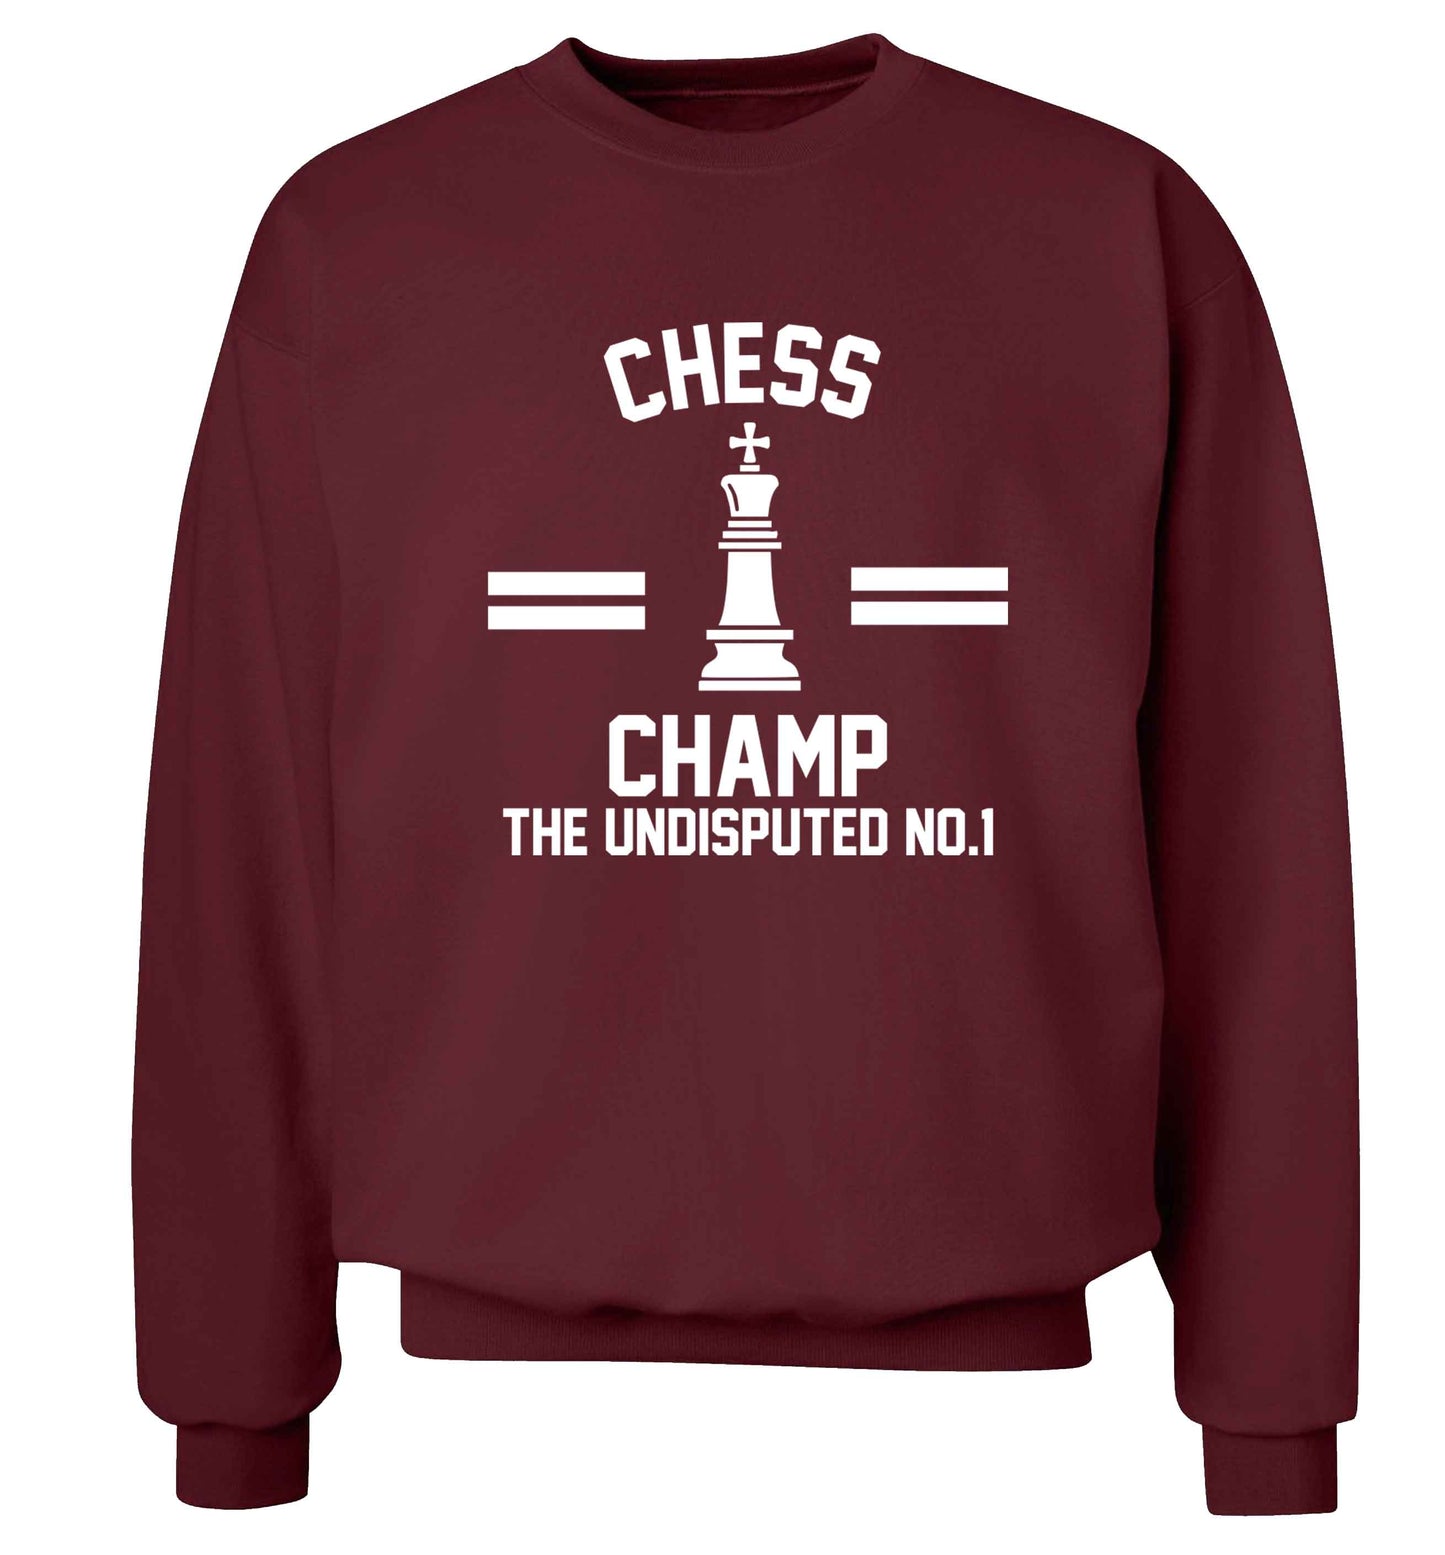 Undisputed chess championship no.1  Adult's unisex maroon Sweater 2XL